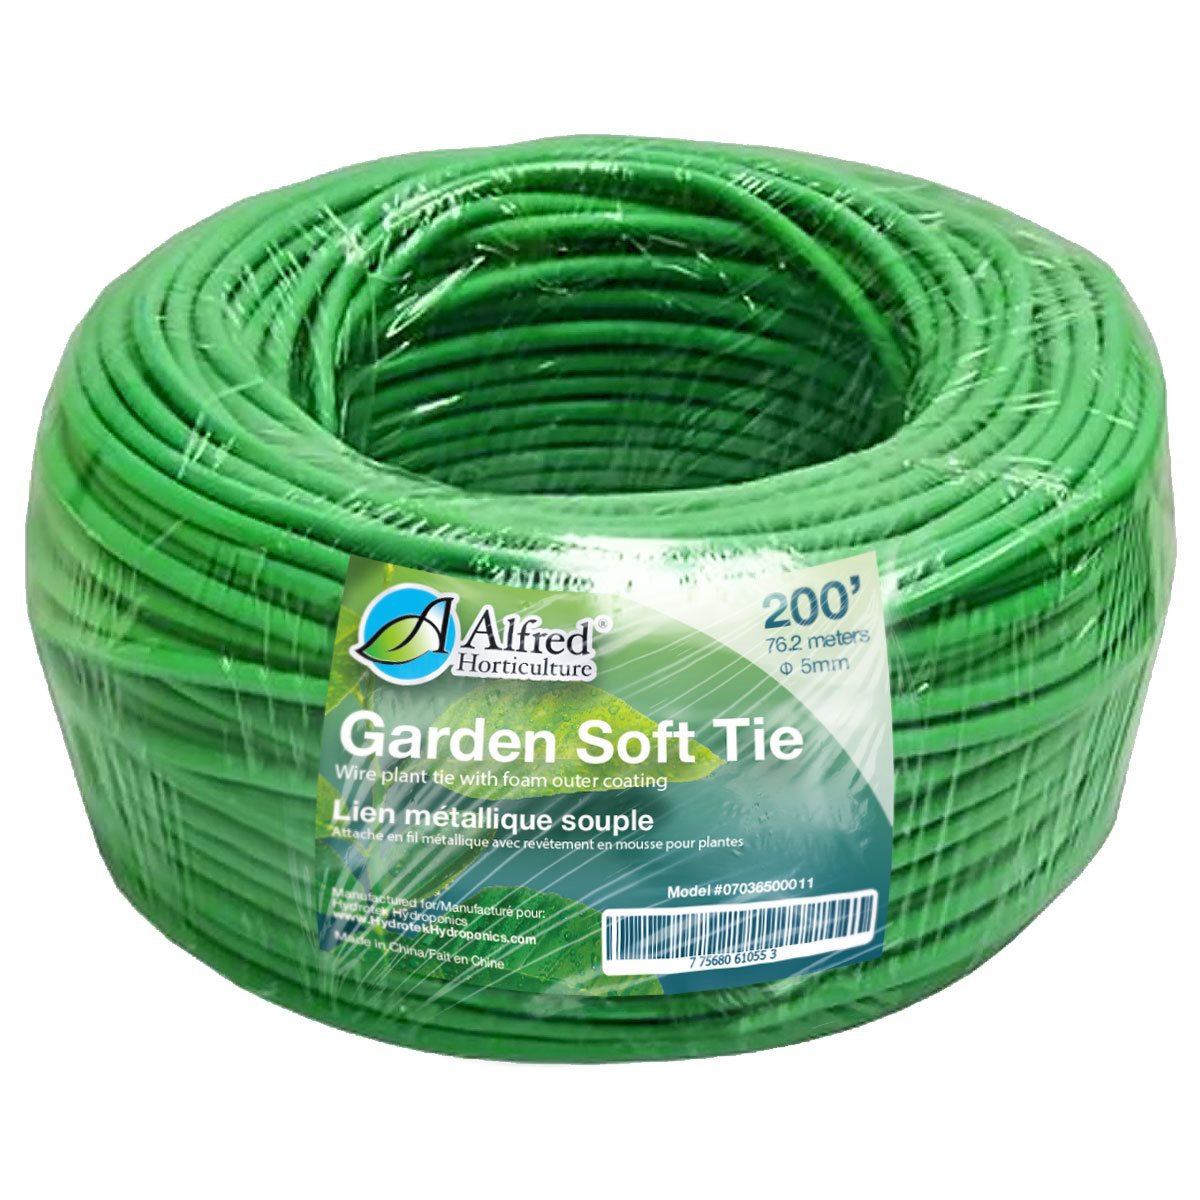 Product Secondary Image:Alfred Garden Soft Tie